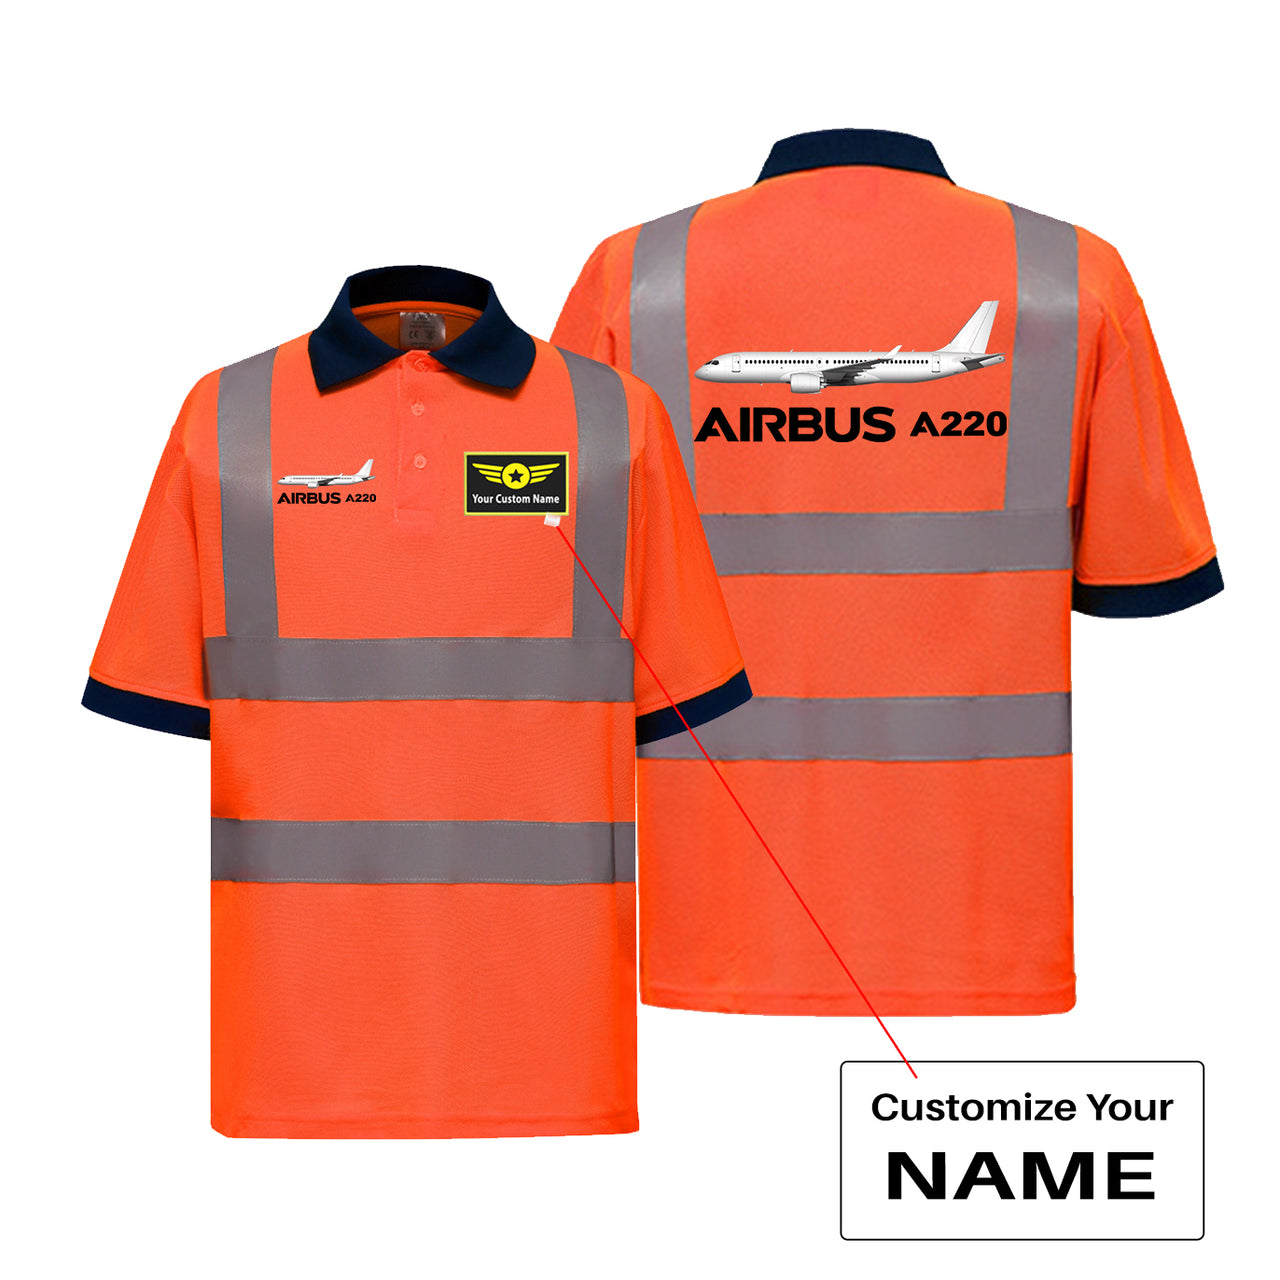 The Airbus A220 Designed Reflective Polo T-Shirts